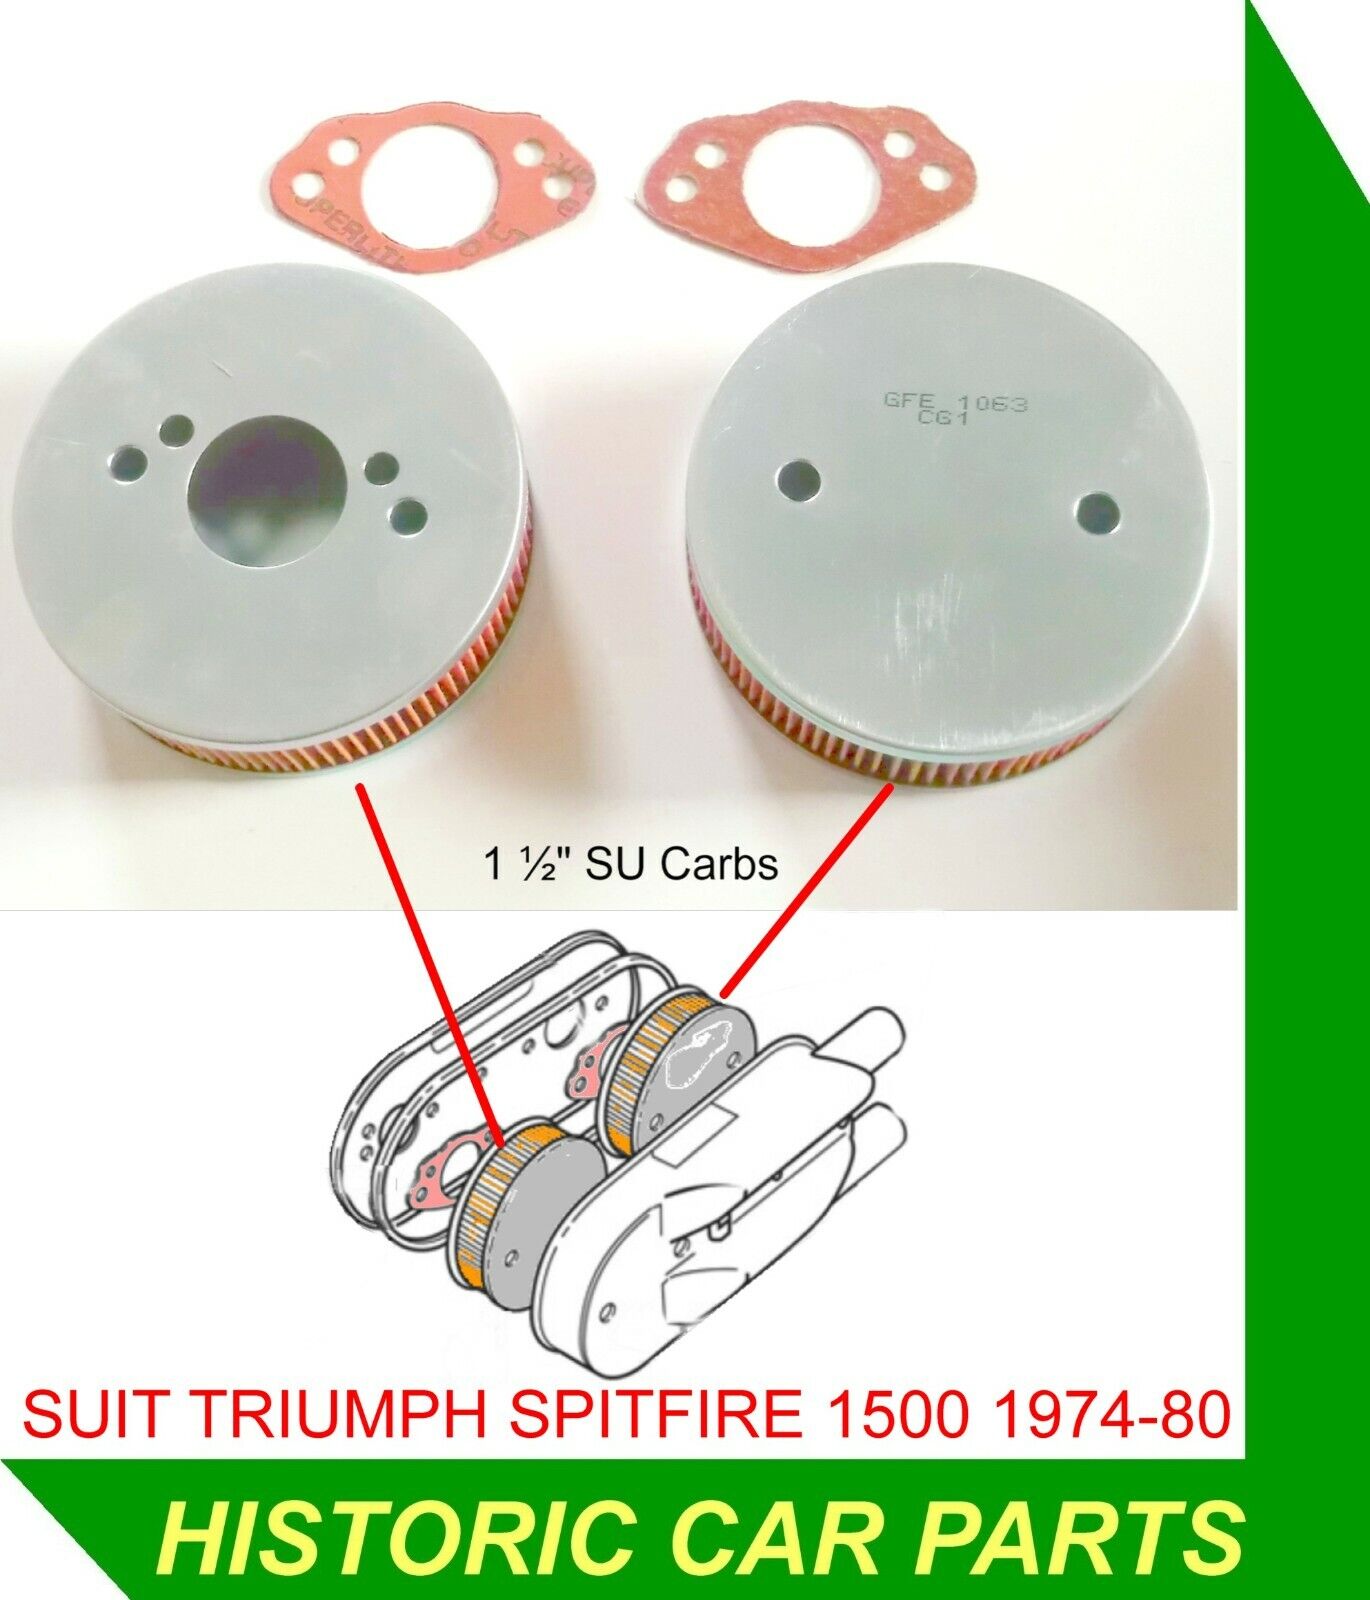 2 x 1½” SU HS4 Carbs Air Filters +Gaskets for Triumph Spitfire 1500 1974-80